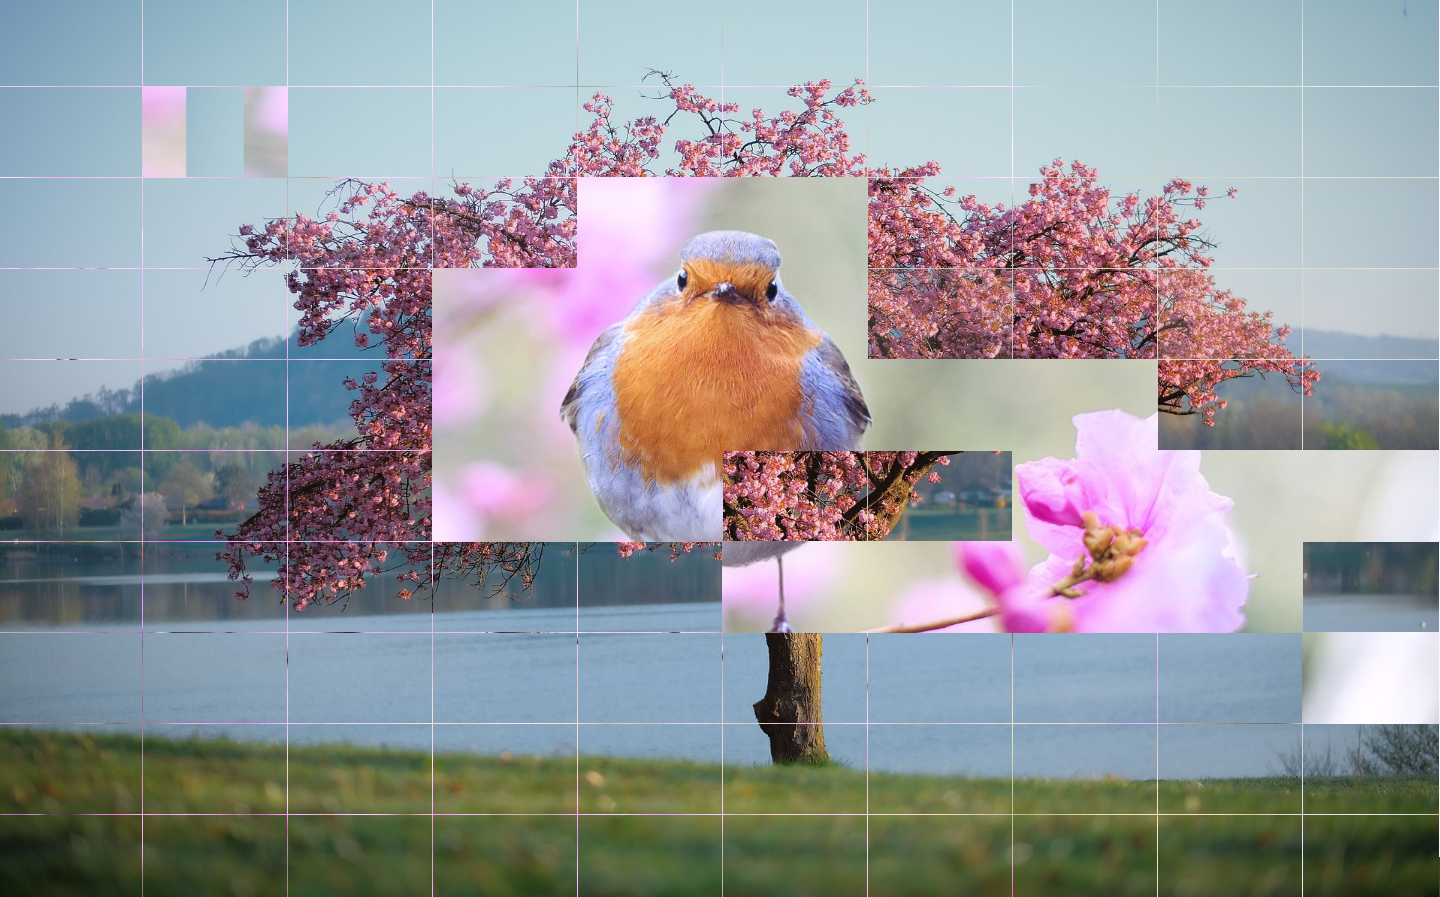 The tiles activity which is part of the Imaginate Suite supplied on the range of SENse interactive projectors. This tile activity shows a cherry tree and when the user wipes over the image it reveals an image of a robin sitting in the cherry tree.